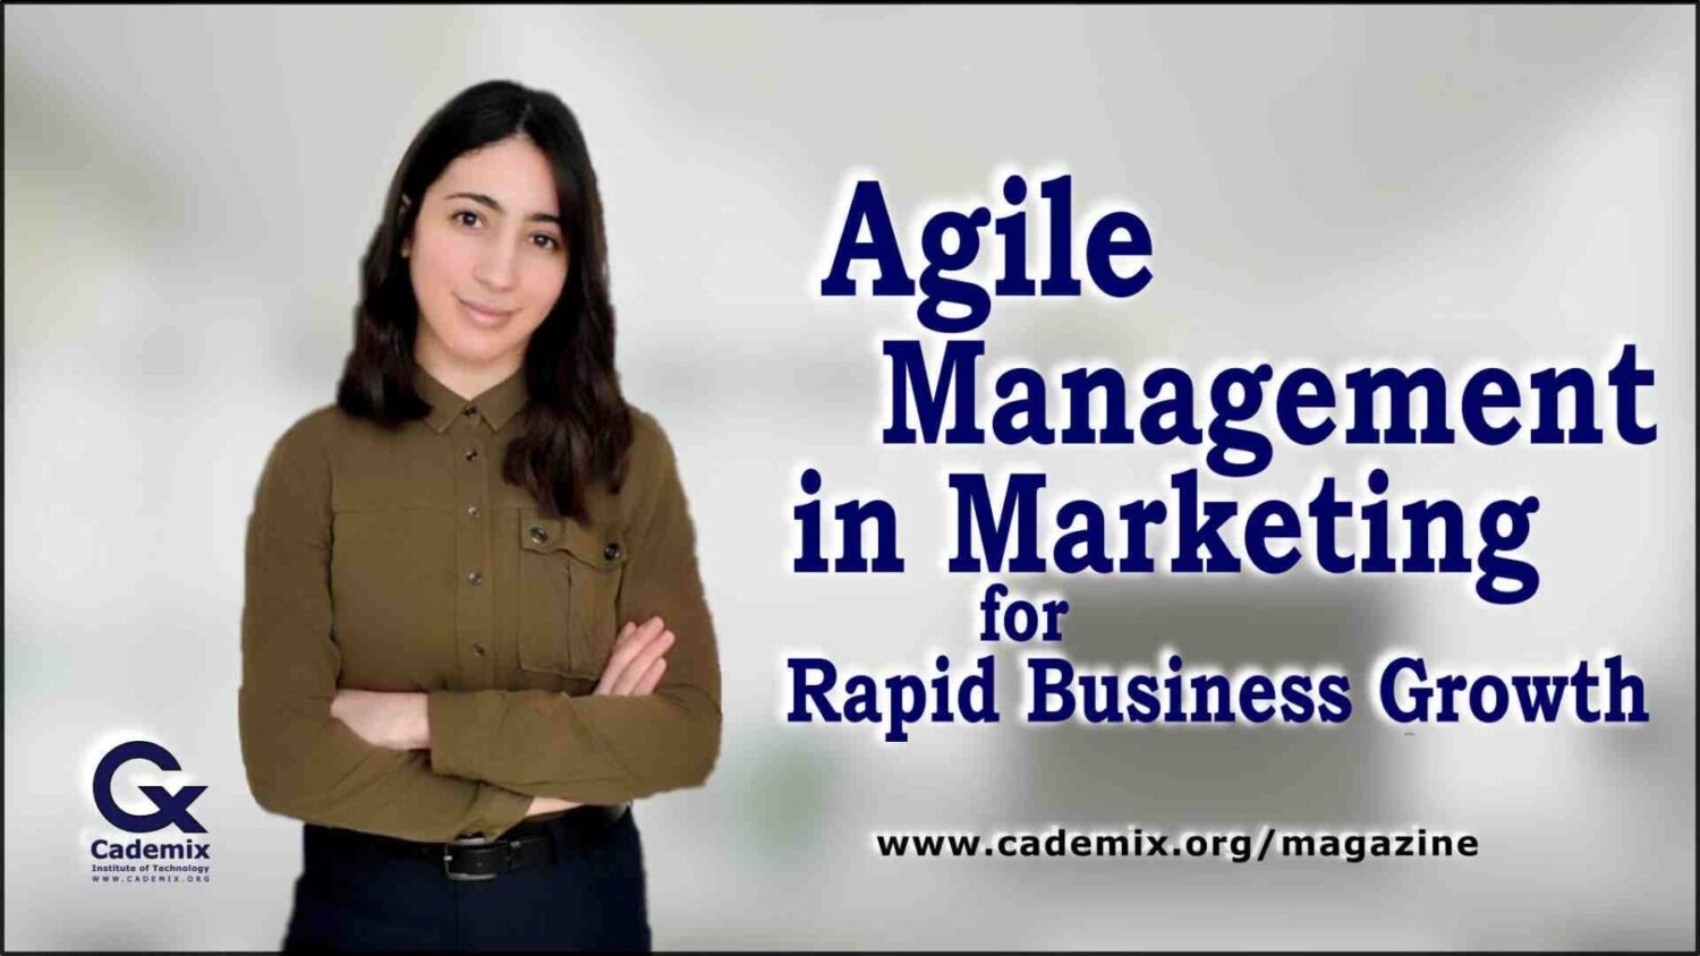 Agile Management in Marketing for Rapid Business Growth Cademix Magazine Article by Karima Aboukal